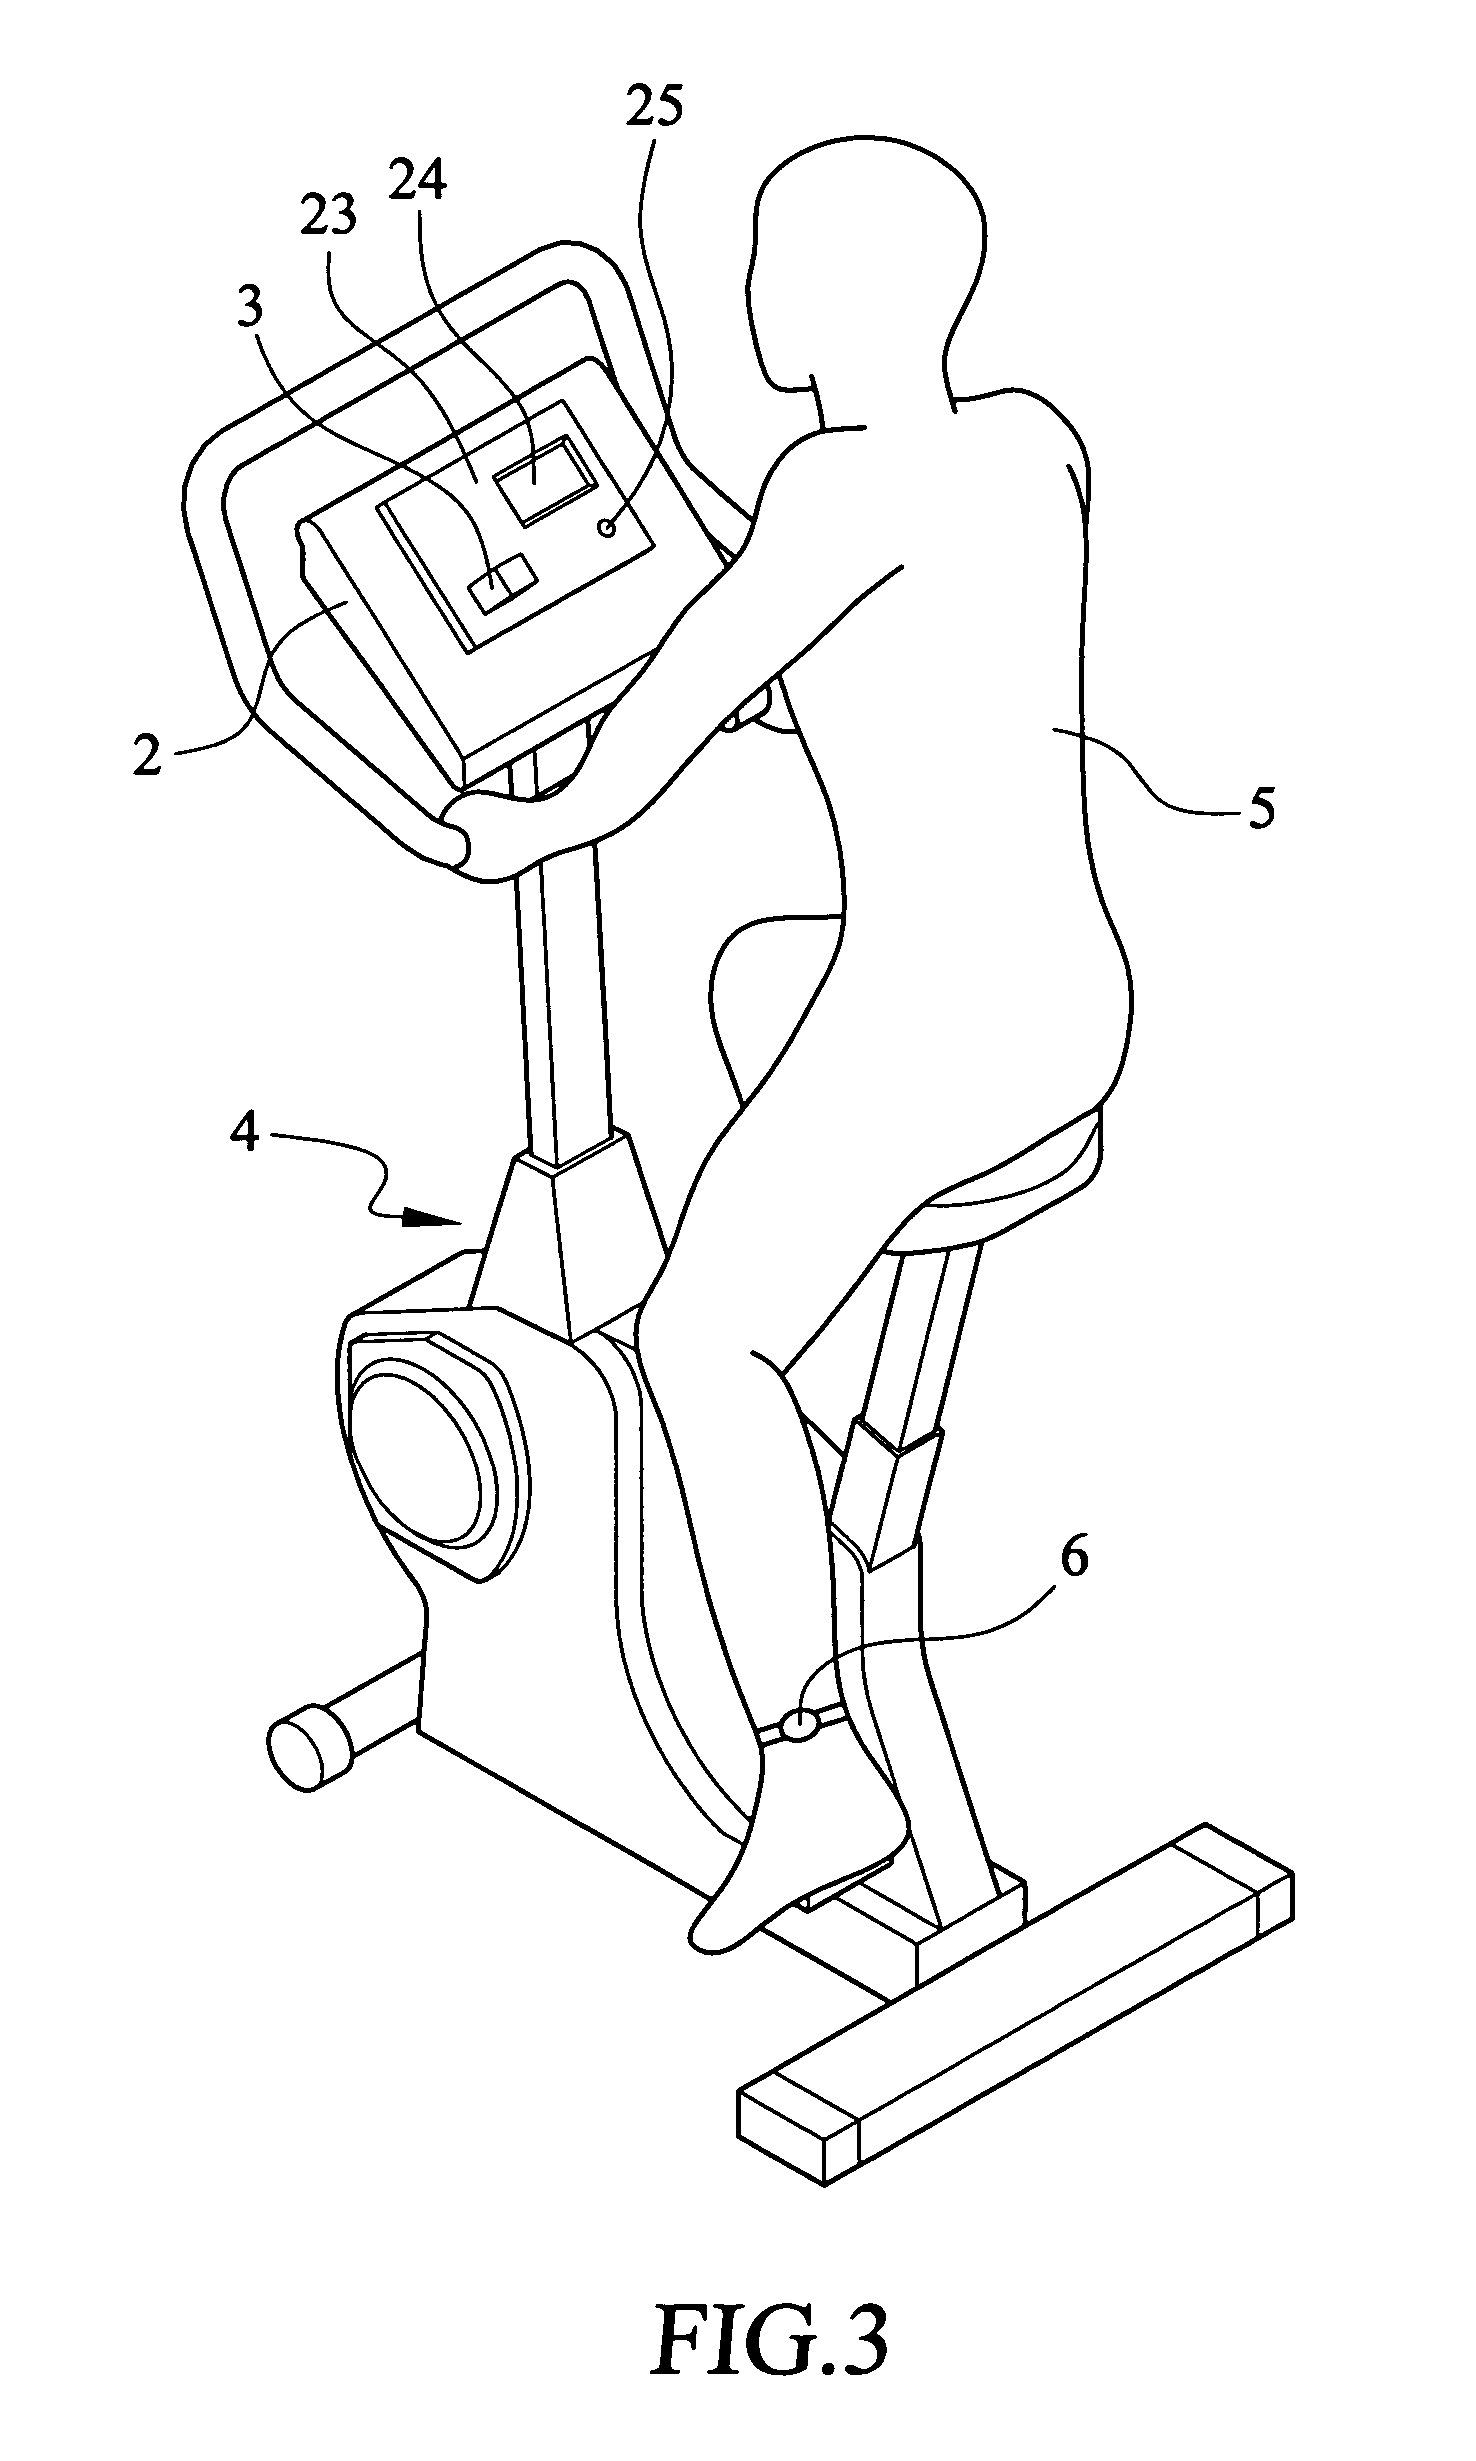 Wireless motion monitoring device incorporating equipment control module of an exercise equipment